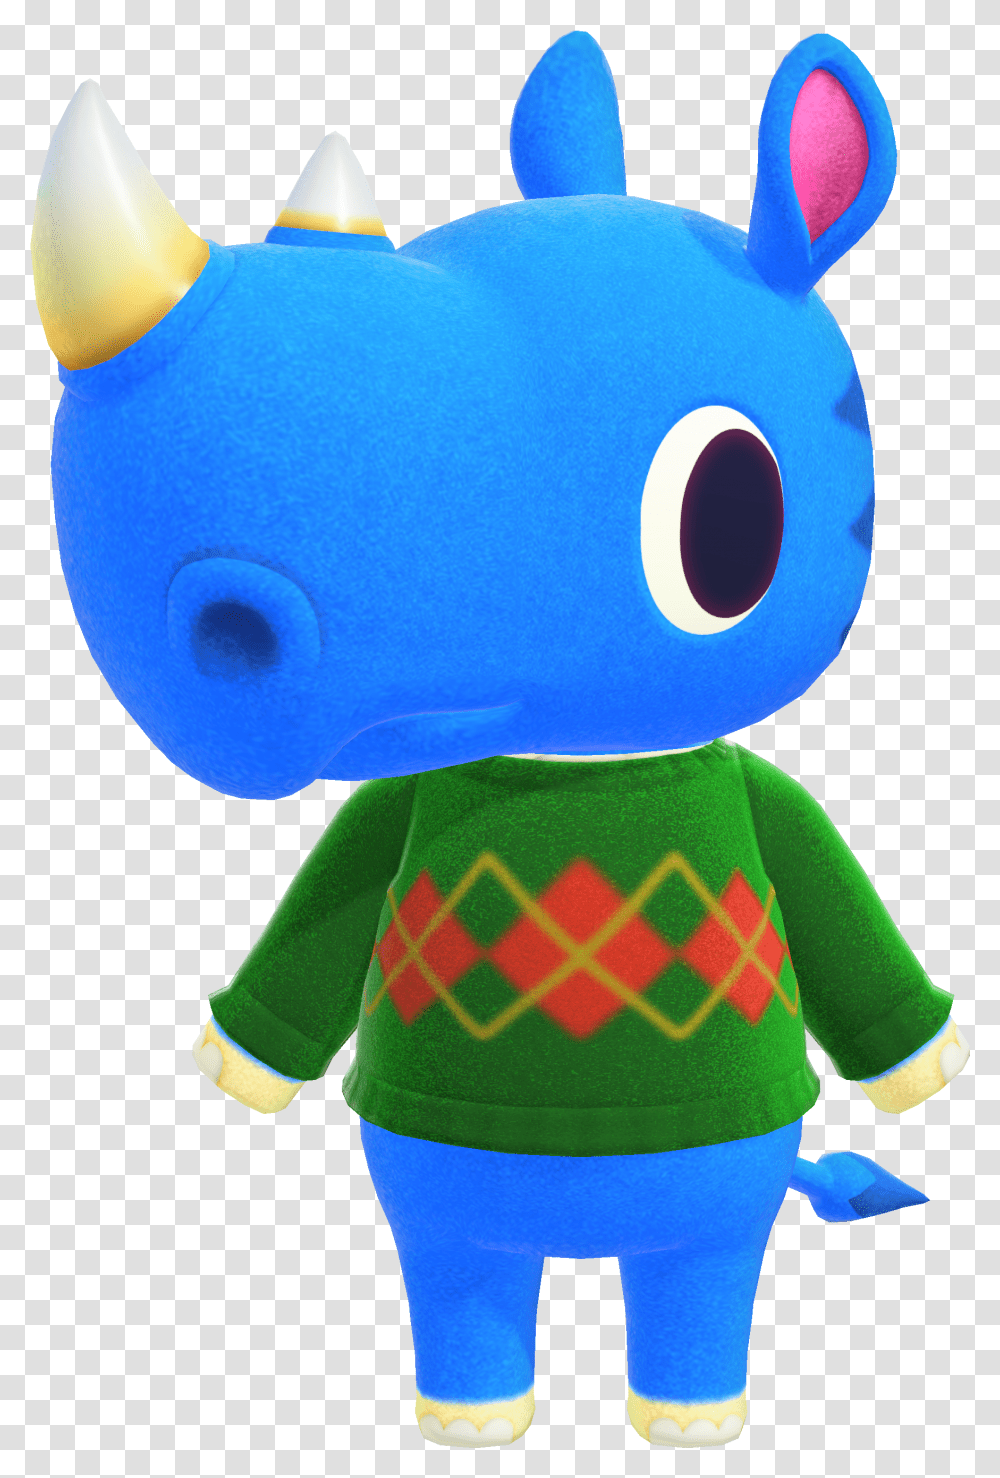 Hornsby Hornsby Animal Crossing New Horizons, Toy, Plush, Alien Transparent Png